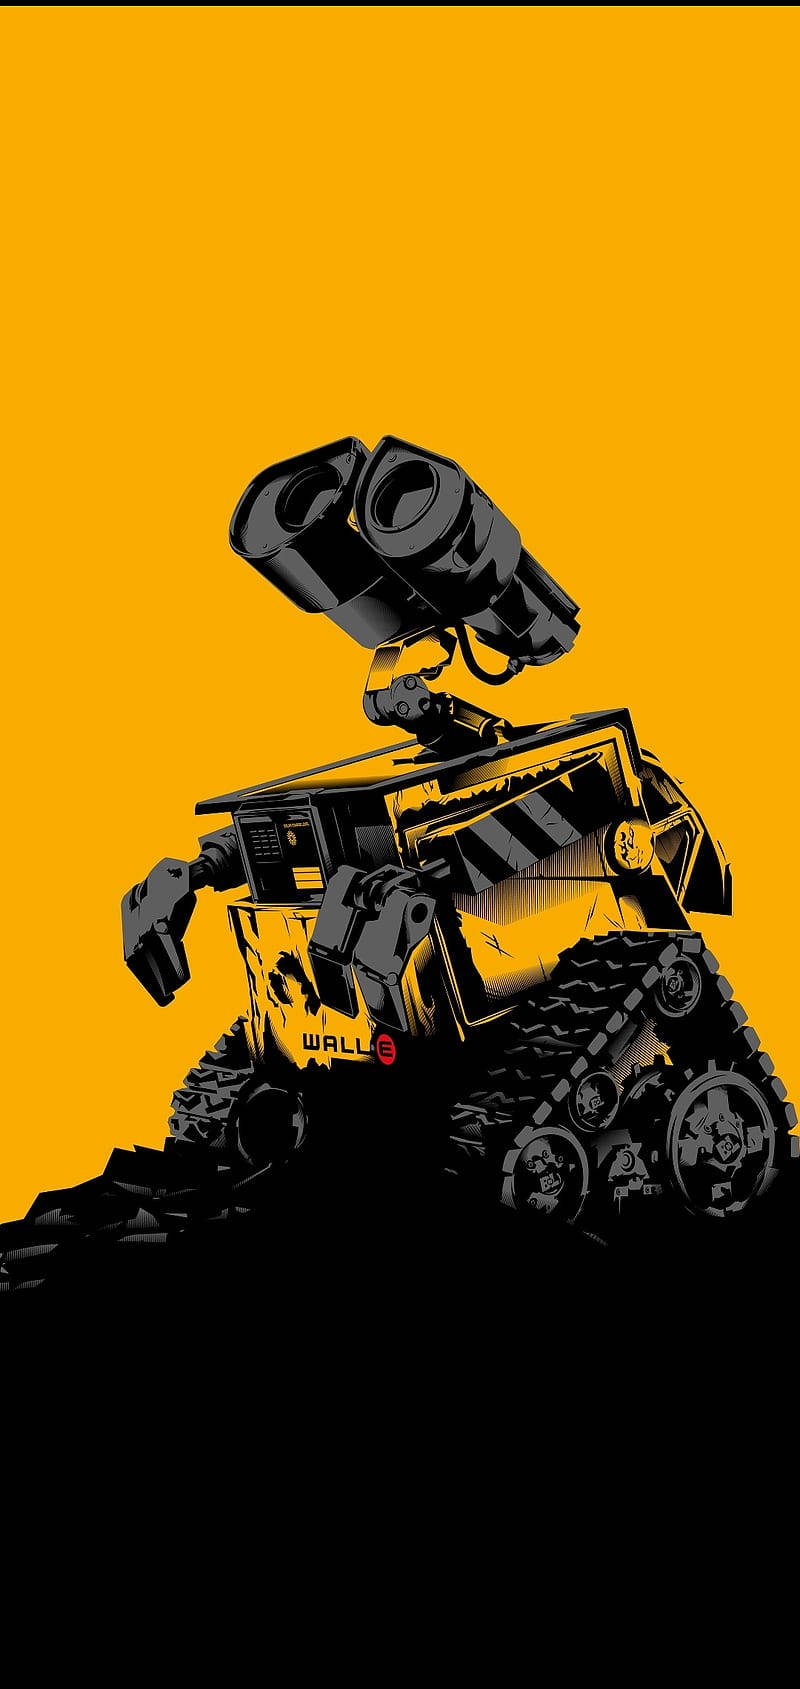 Wall-e Cool Android Vector Background